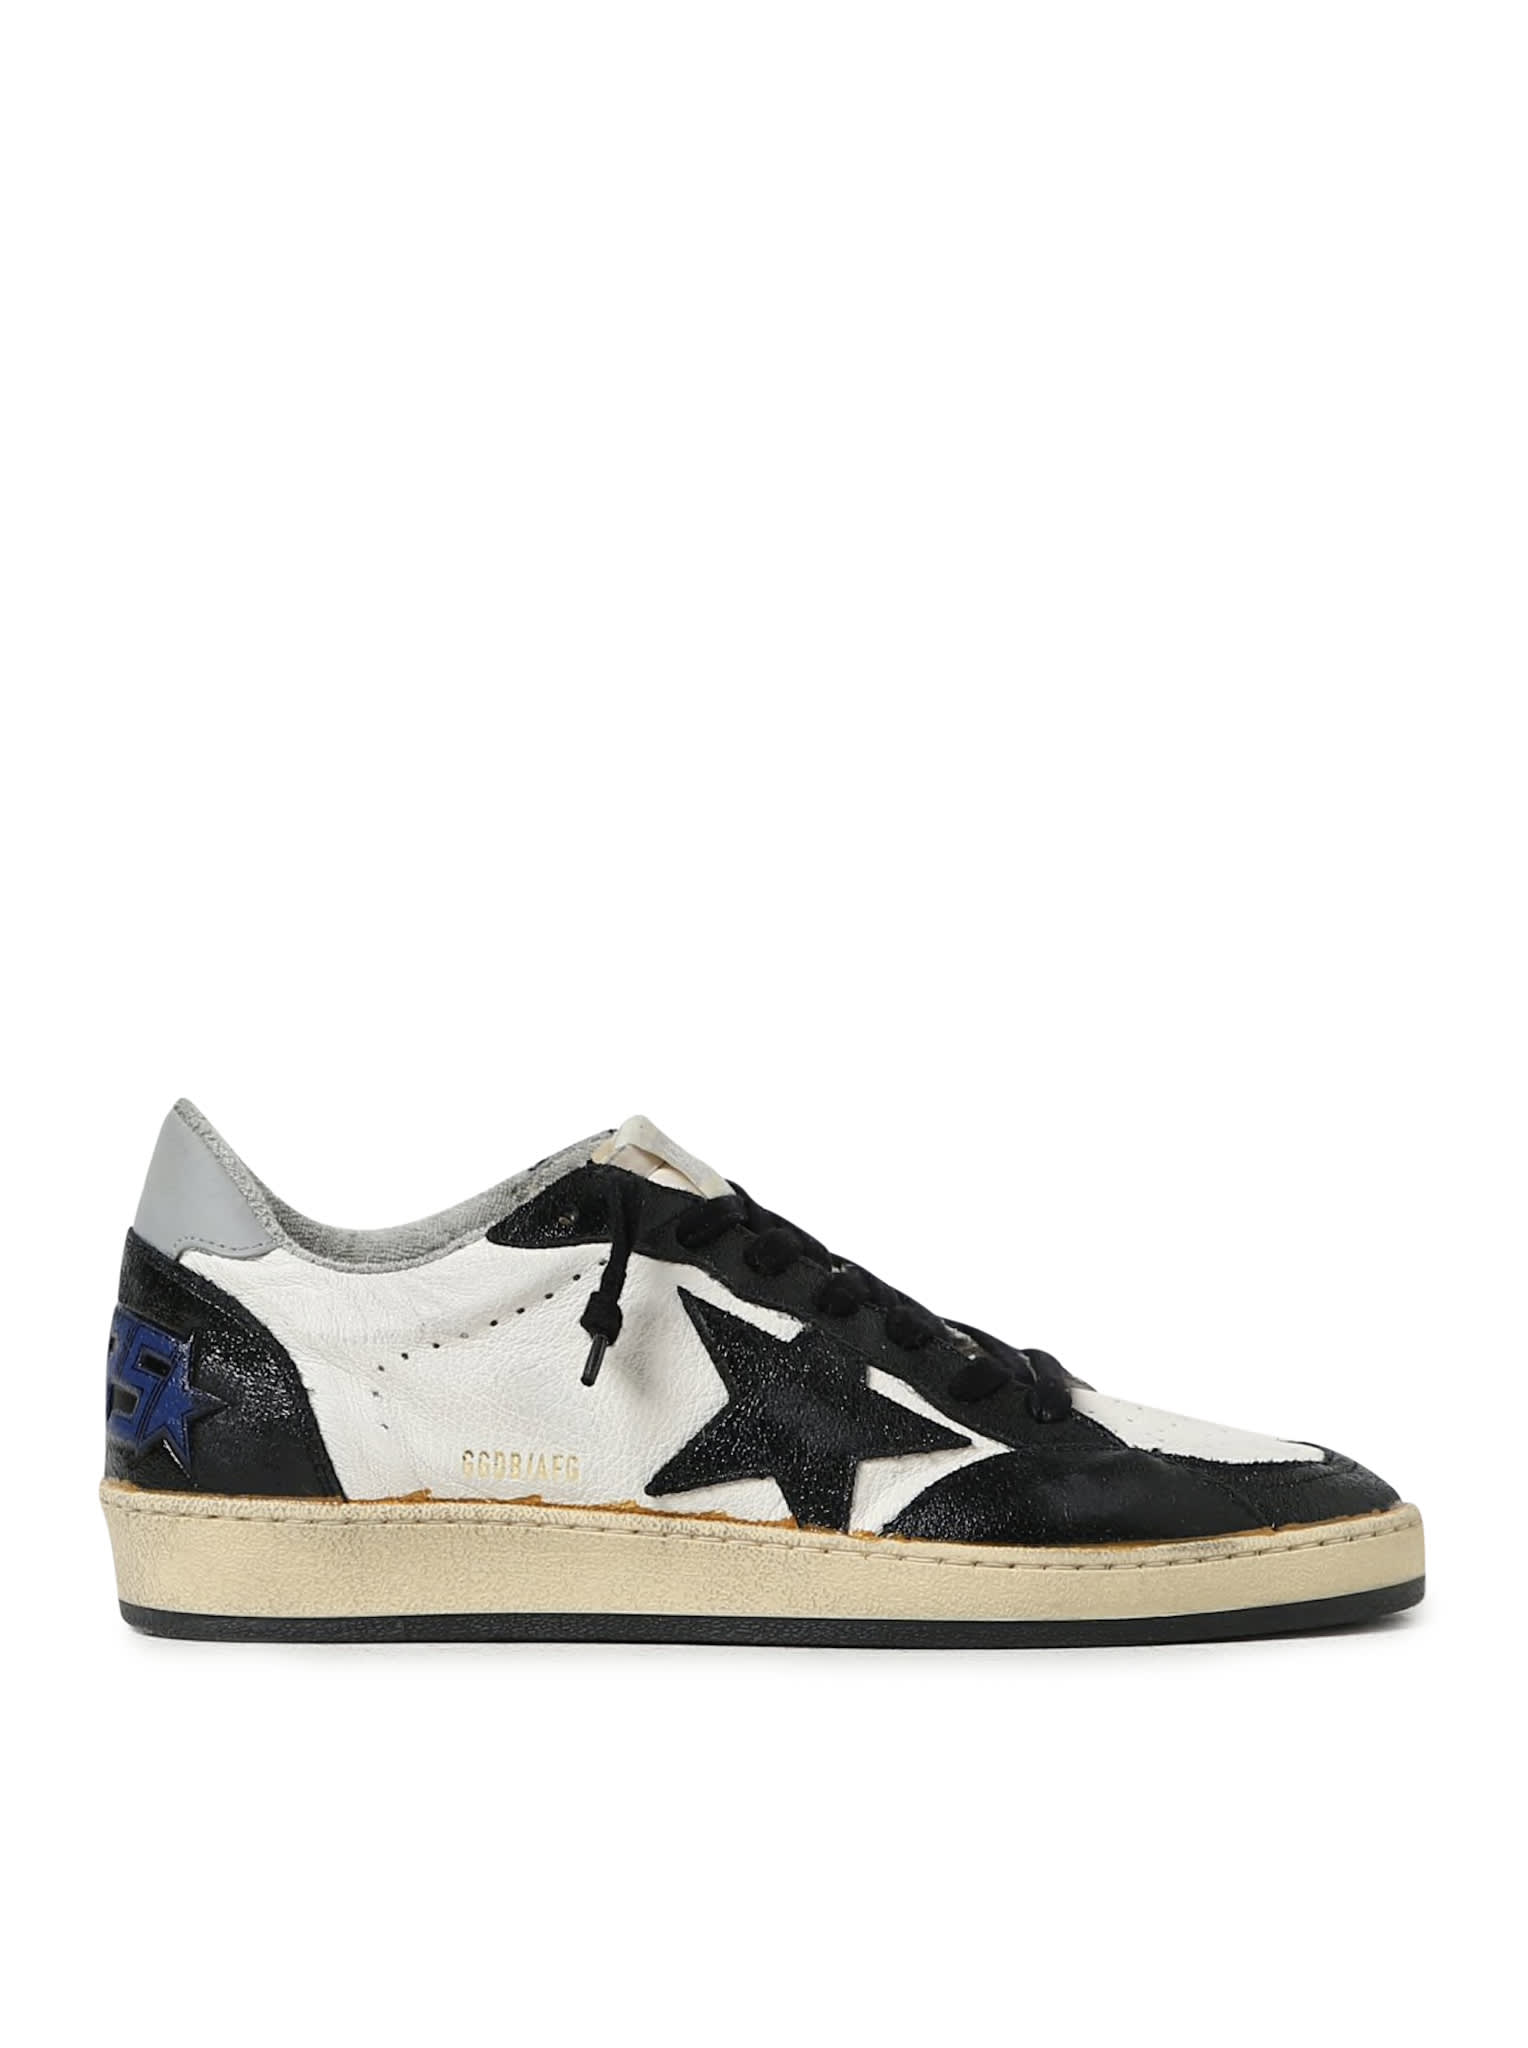 Golden Goose Ballstar Nappa Upper Leather Toe Star And Spur Nylon Tongue In White Black Grey